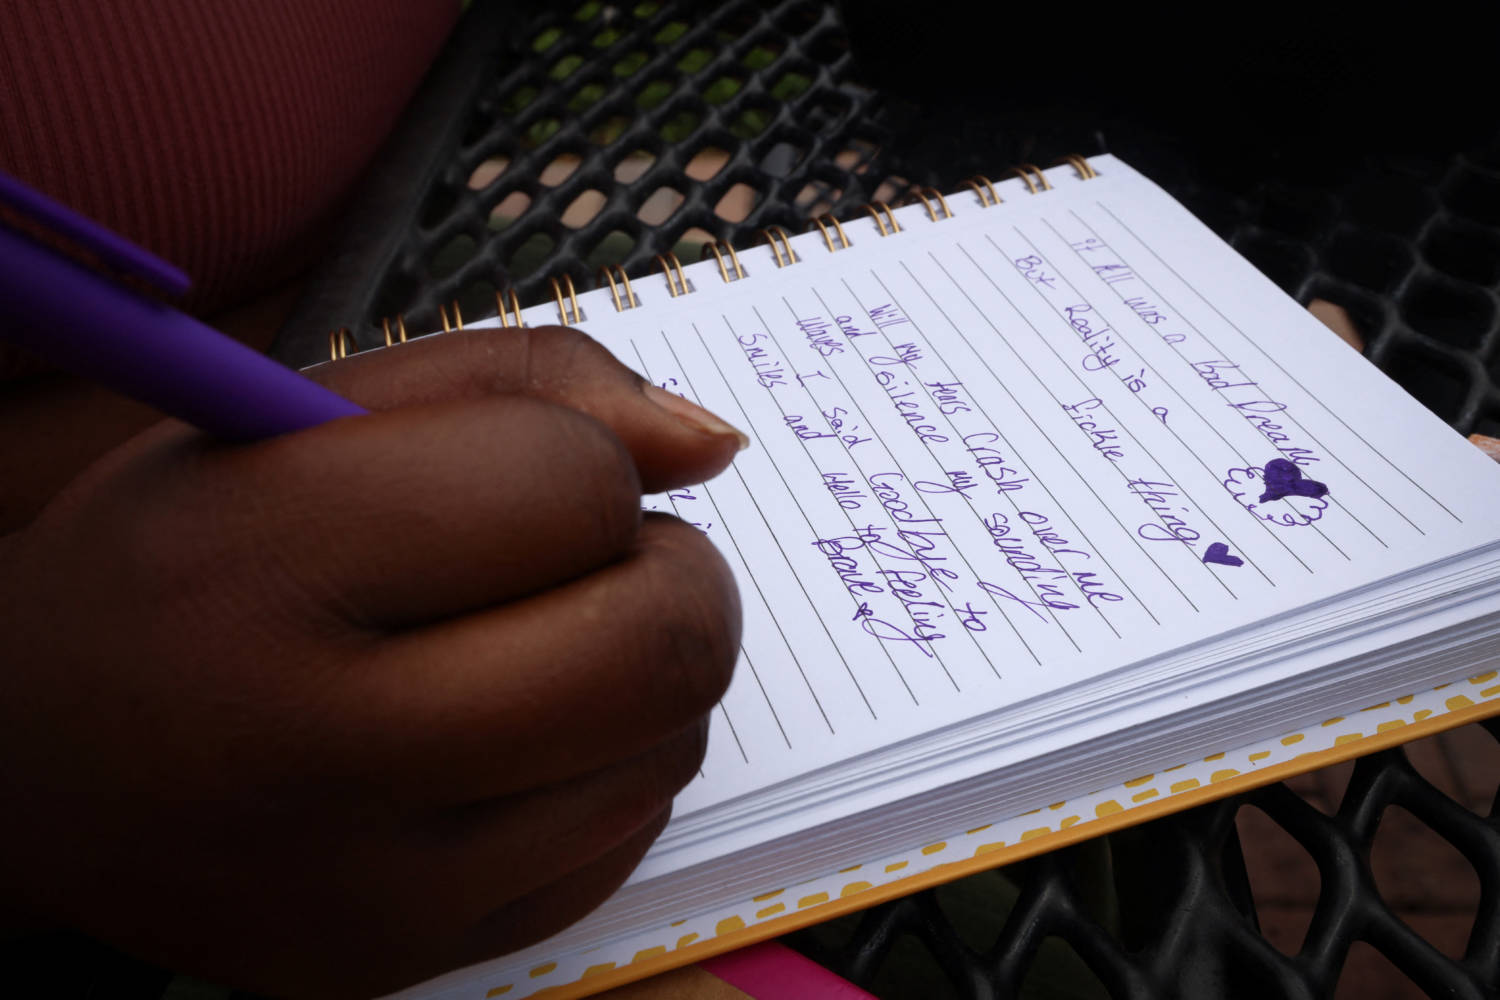 Sammy Writes Her Hopes And Dreams In A Journal As She Writes Down Reminders Of Bravery Outside Her Home In Ft. Lauderdale